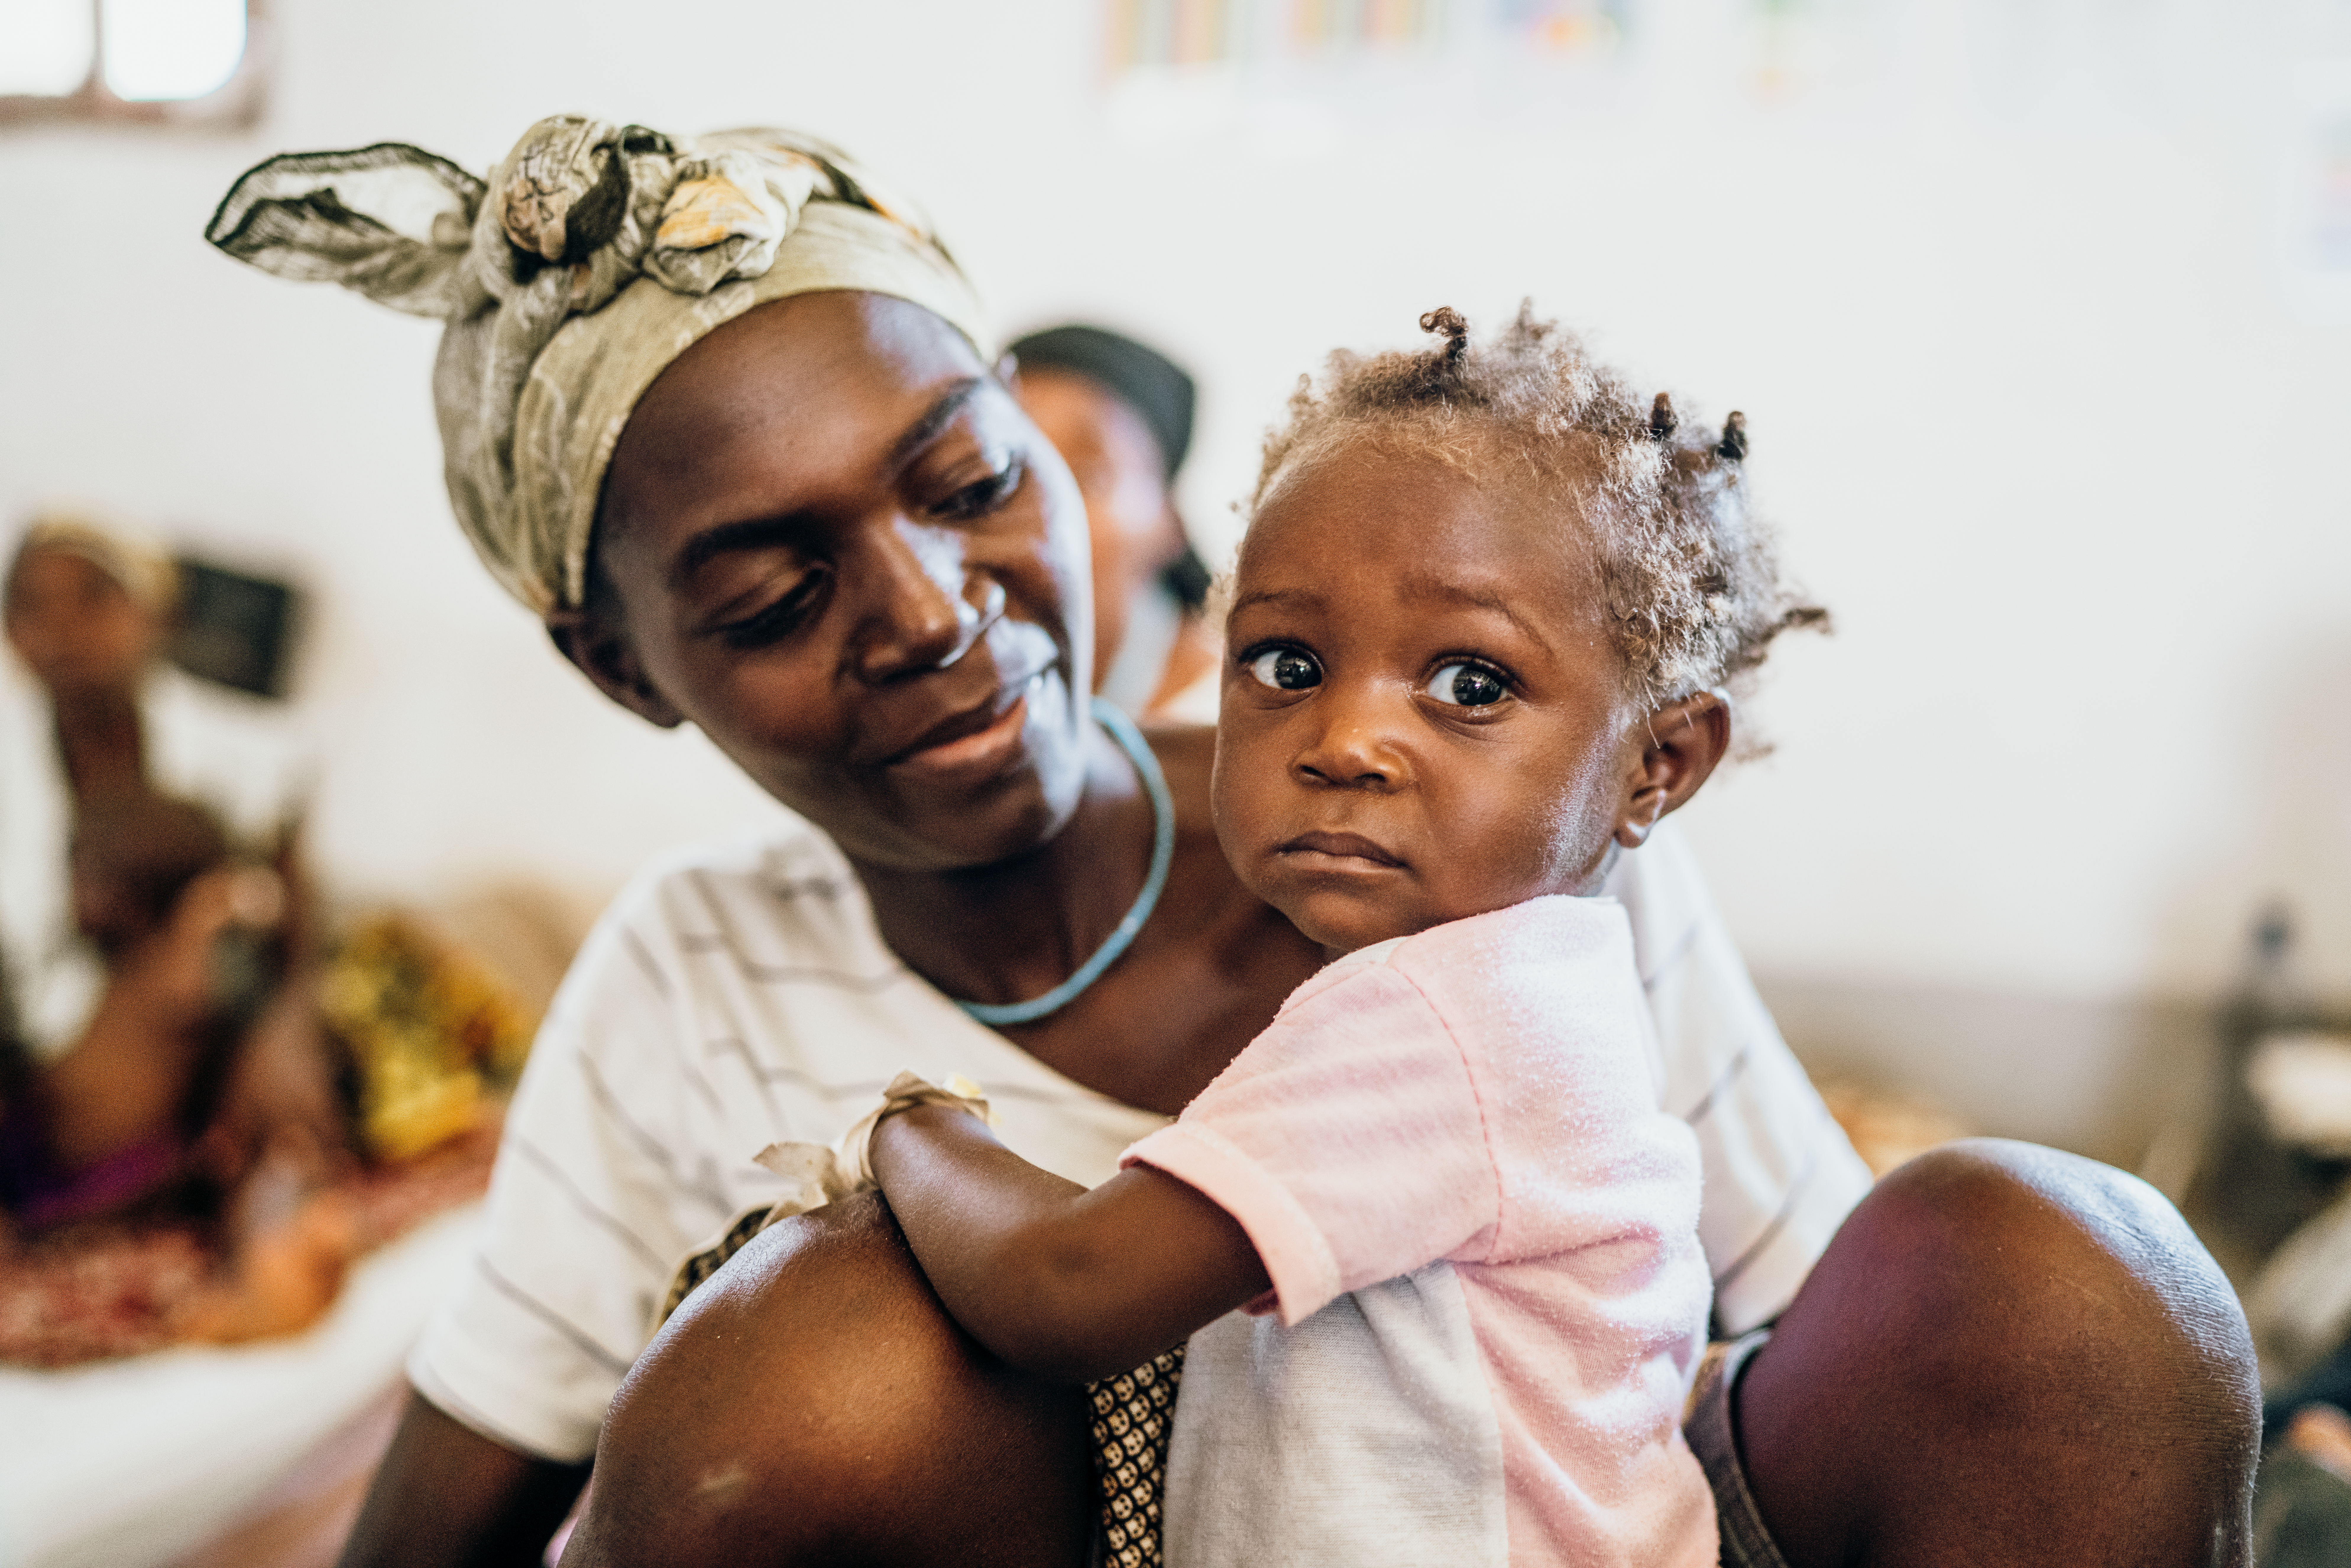 zeferina and her mother at a malnutrition feeding clinic in Angola